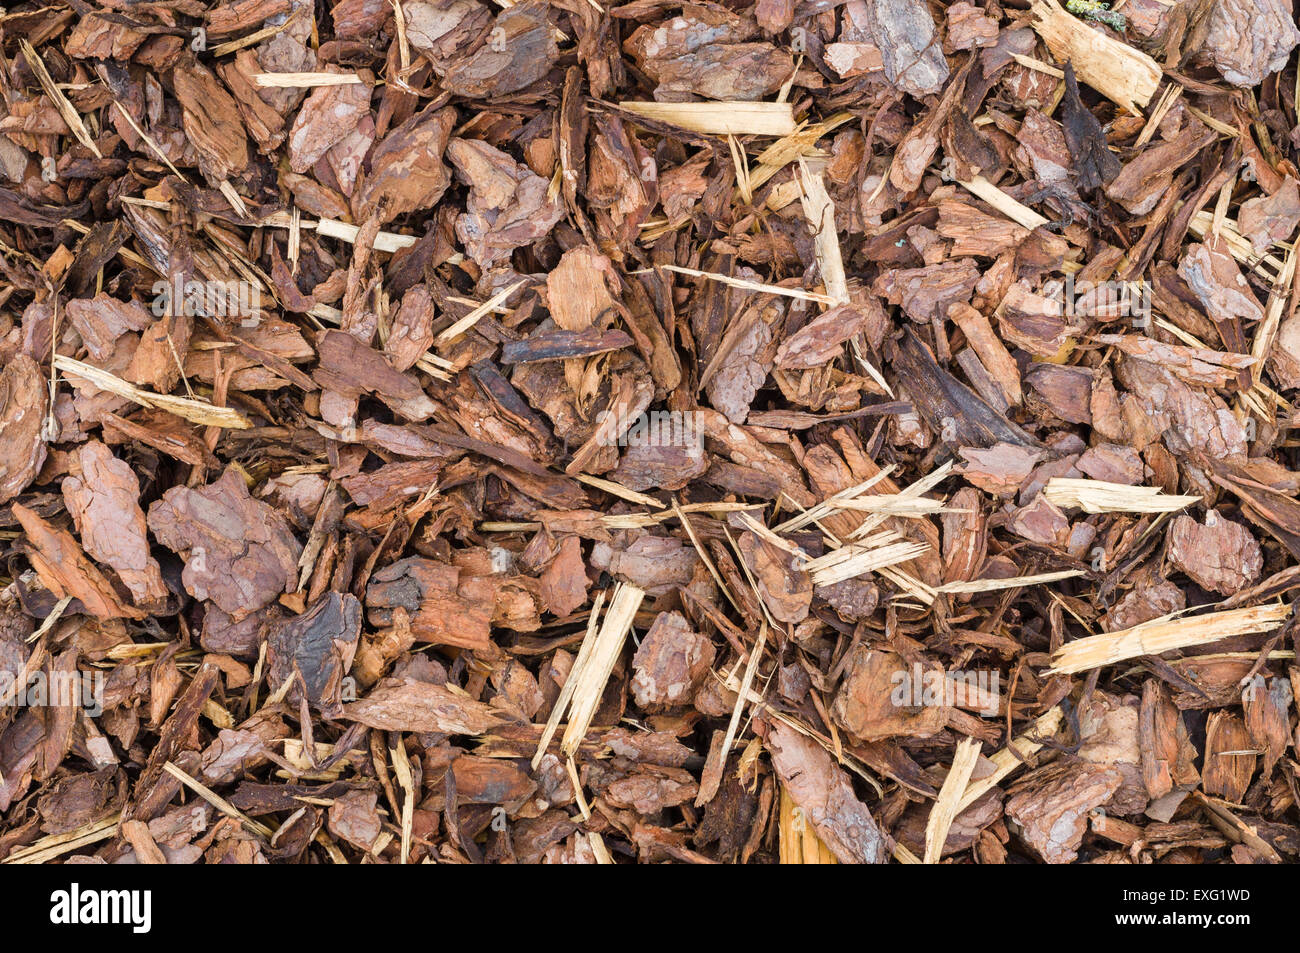 Natural bark used as a soil covering for mulch in the garden, wood chip background texture Stock Photo